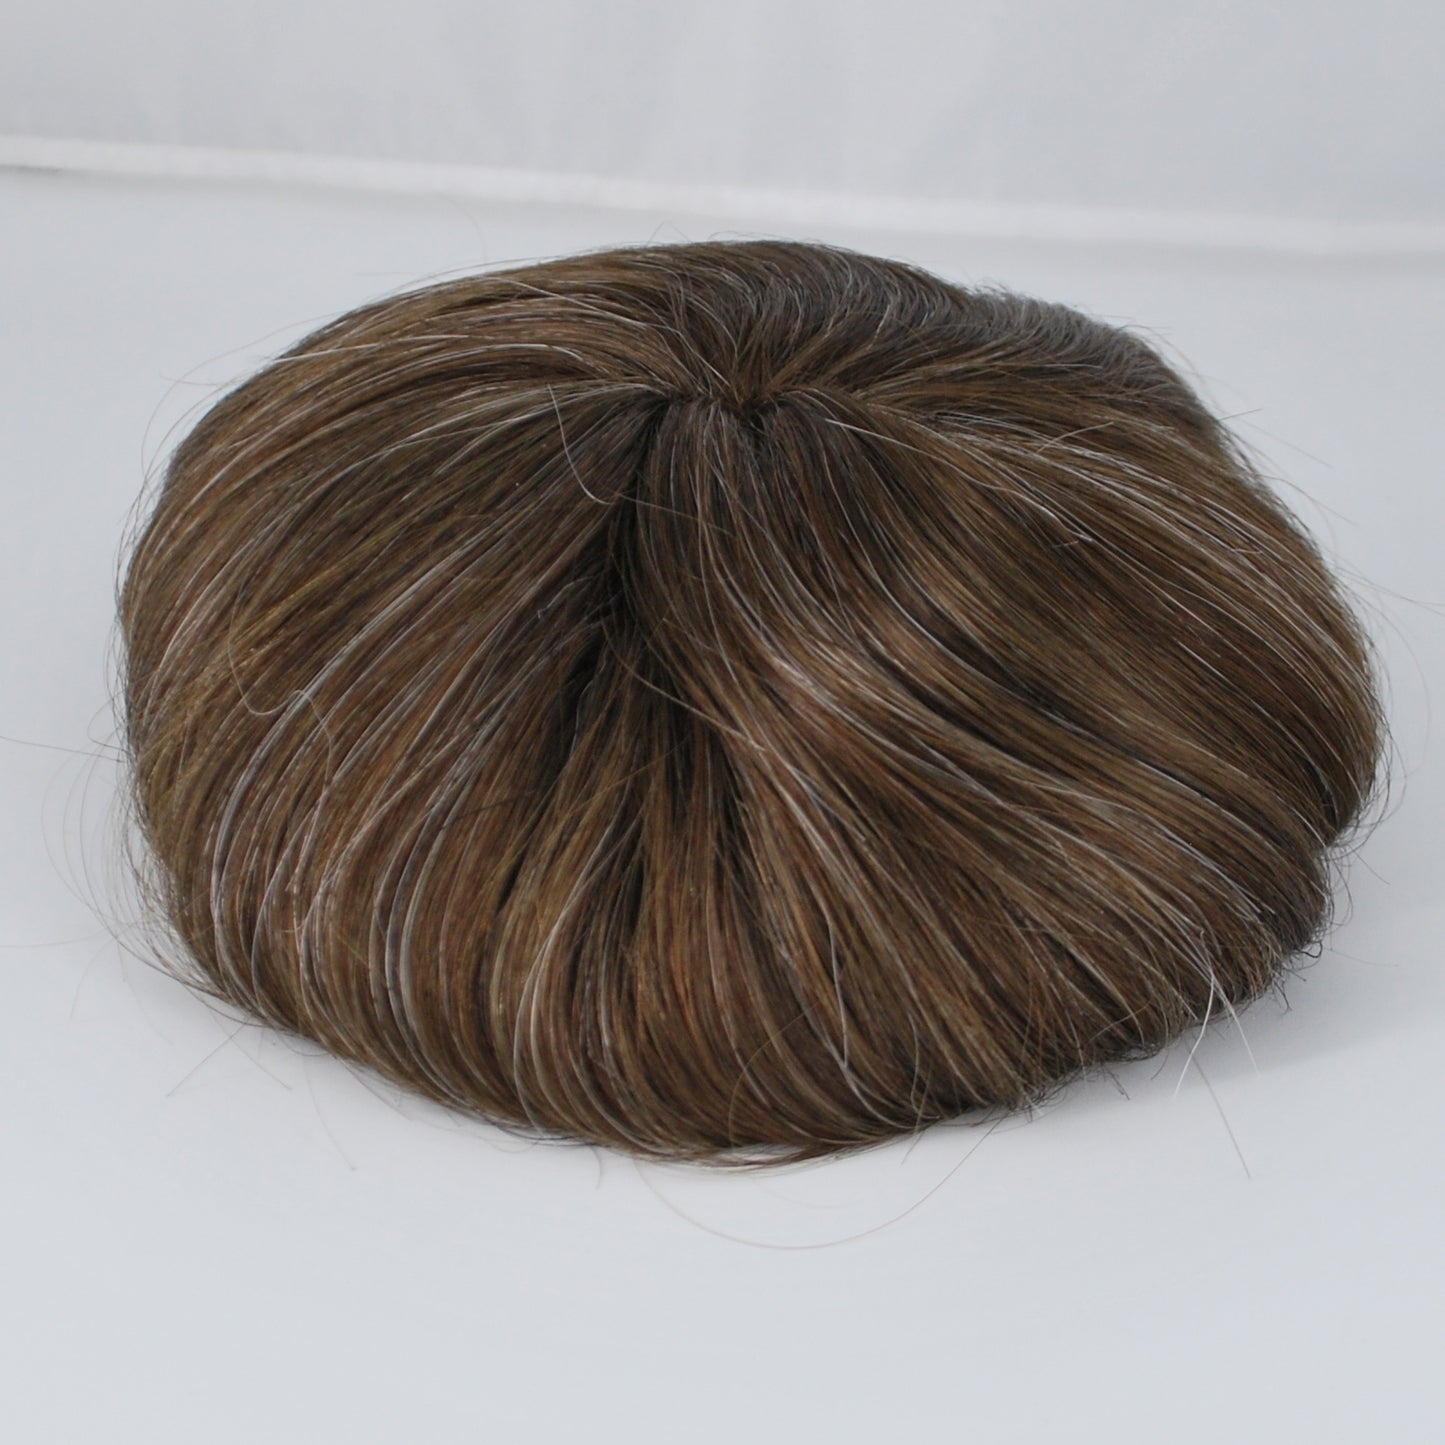 Clearance medium brown mixed 15% grey hair system for men french lace with PU around toupee wig